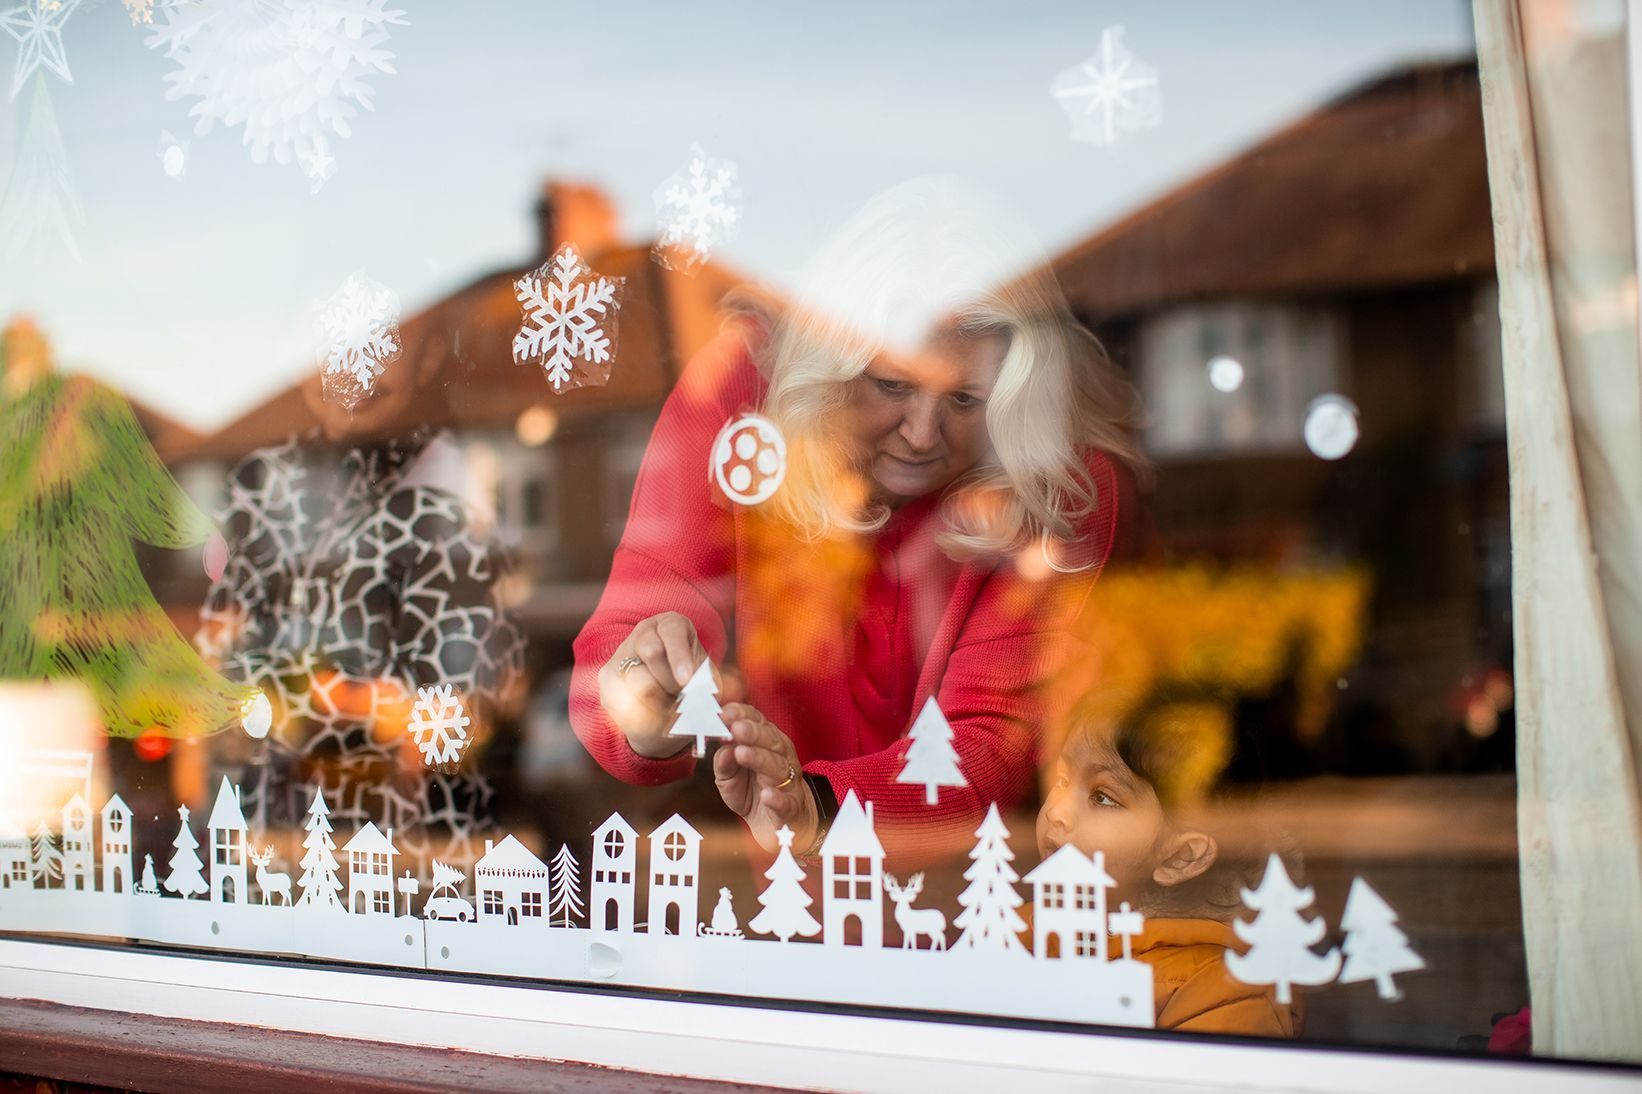 A woman adding the final touches to her advent window - you can see a paper strip of houses along the bottom with paper snowflakes and trees above it.